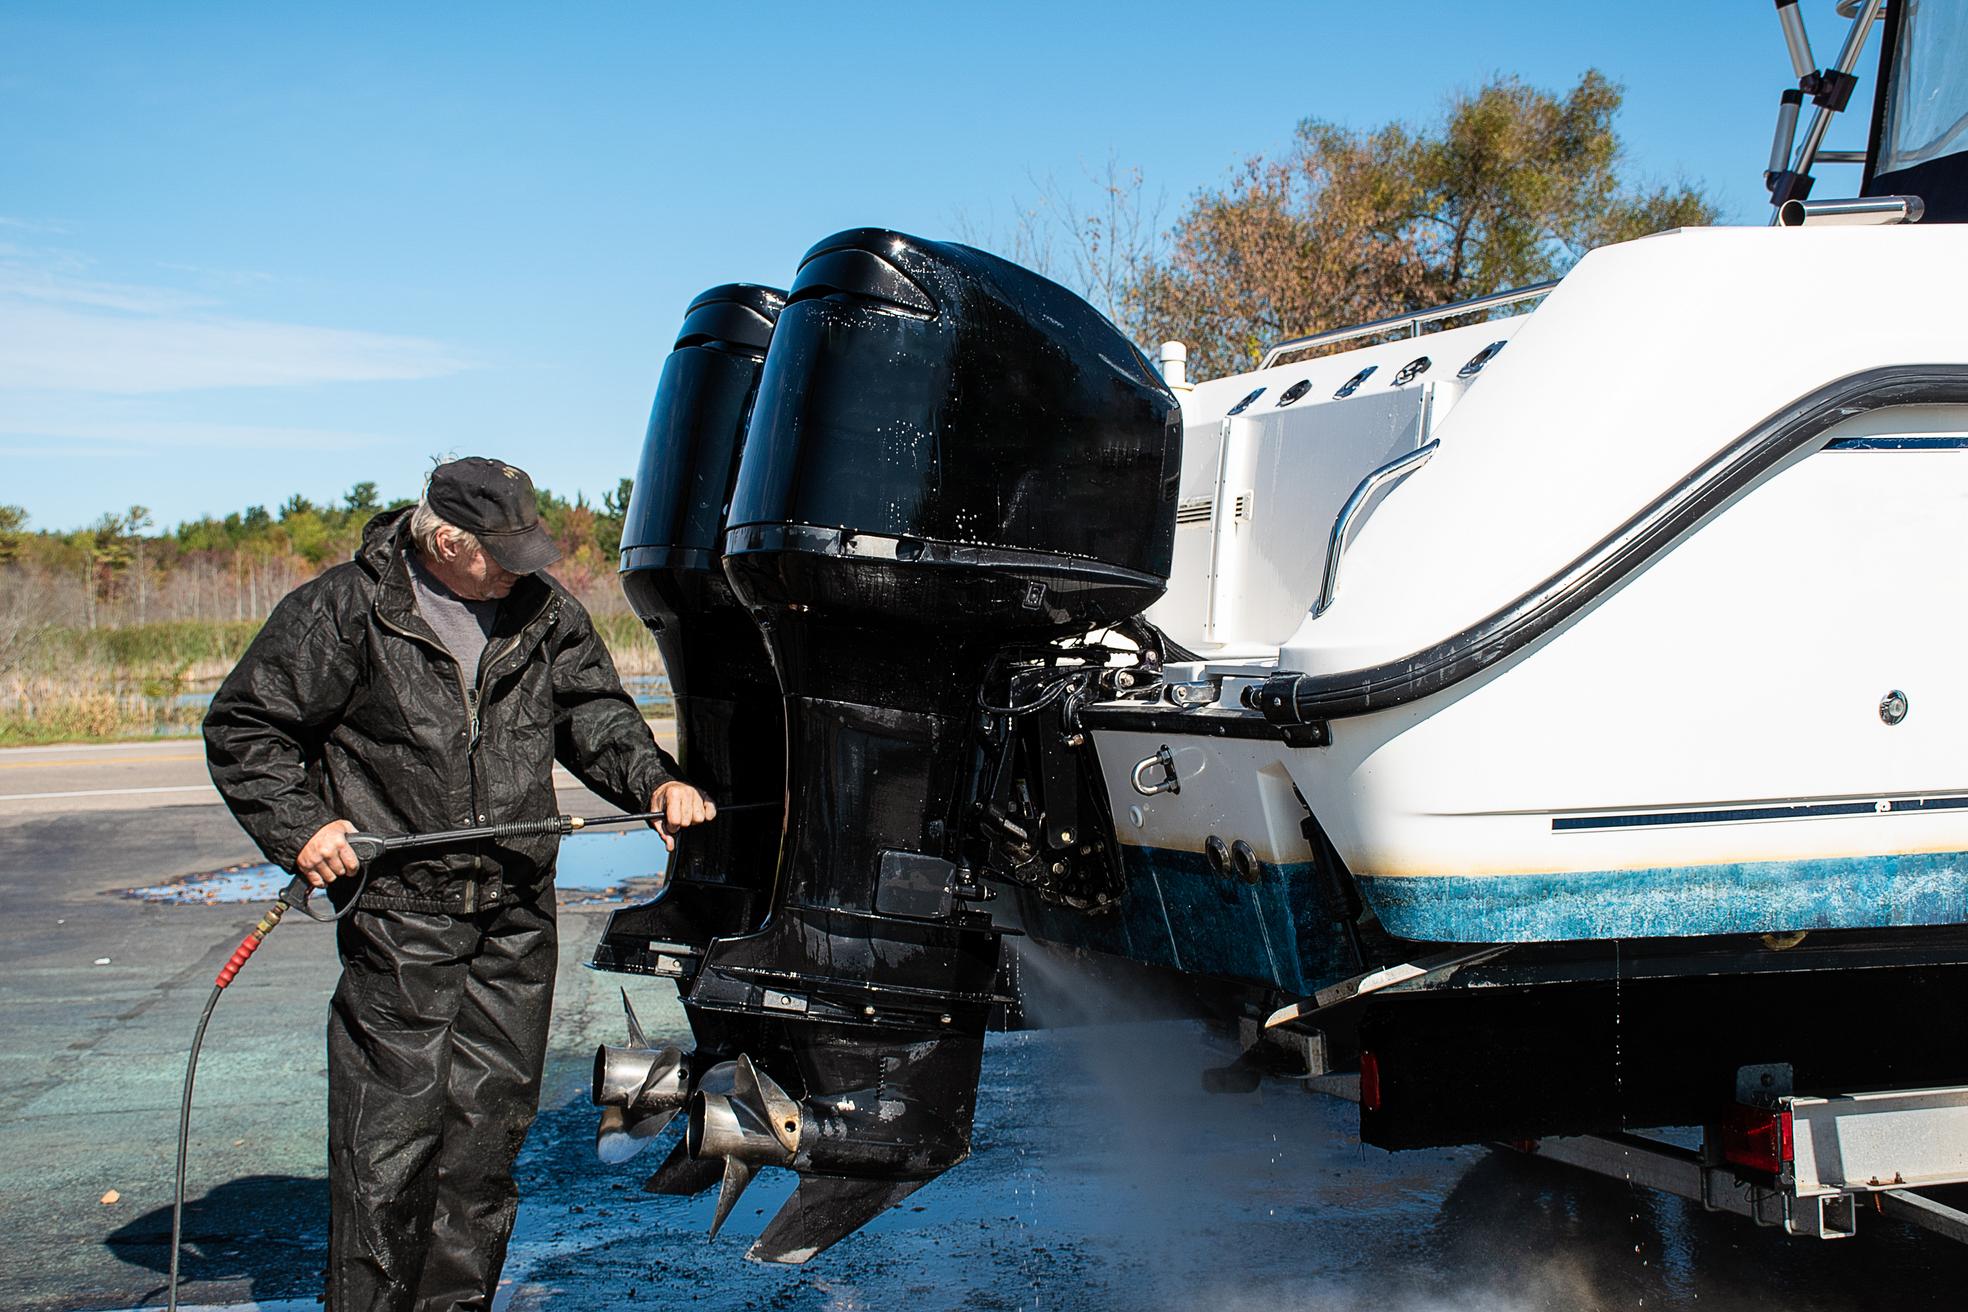 Winter Storage Tips for Outboard Motors